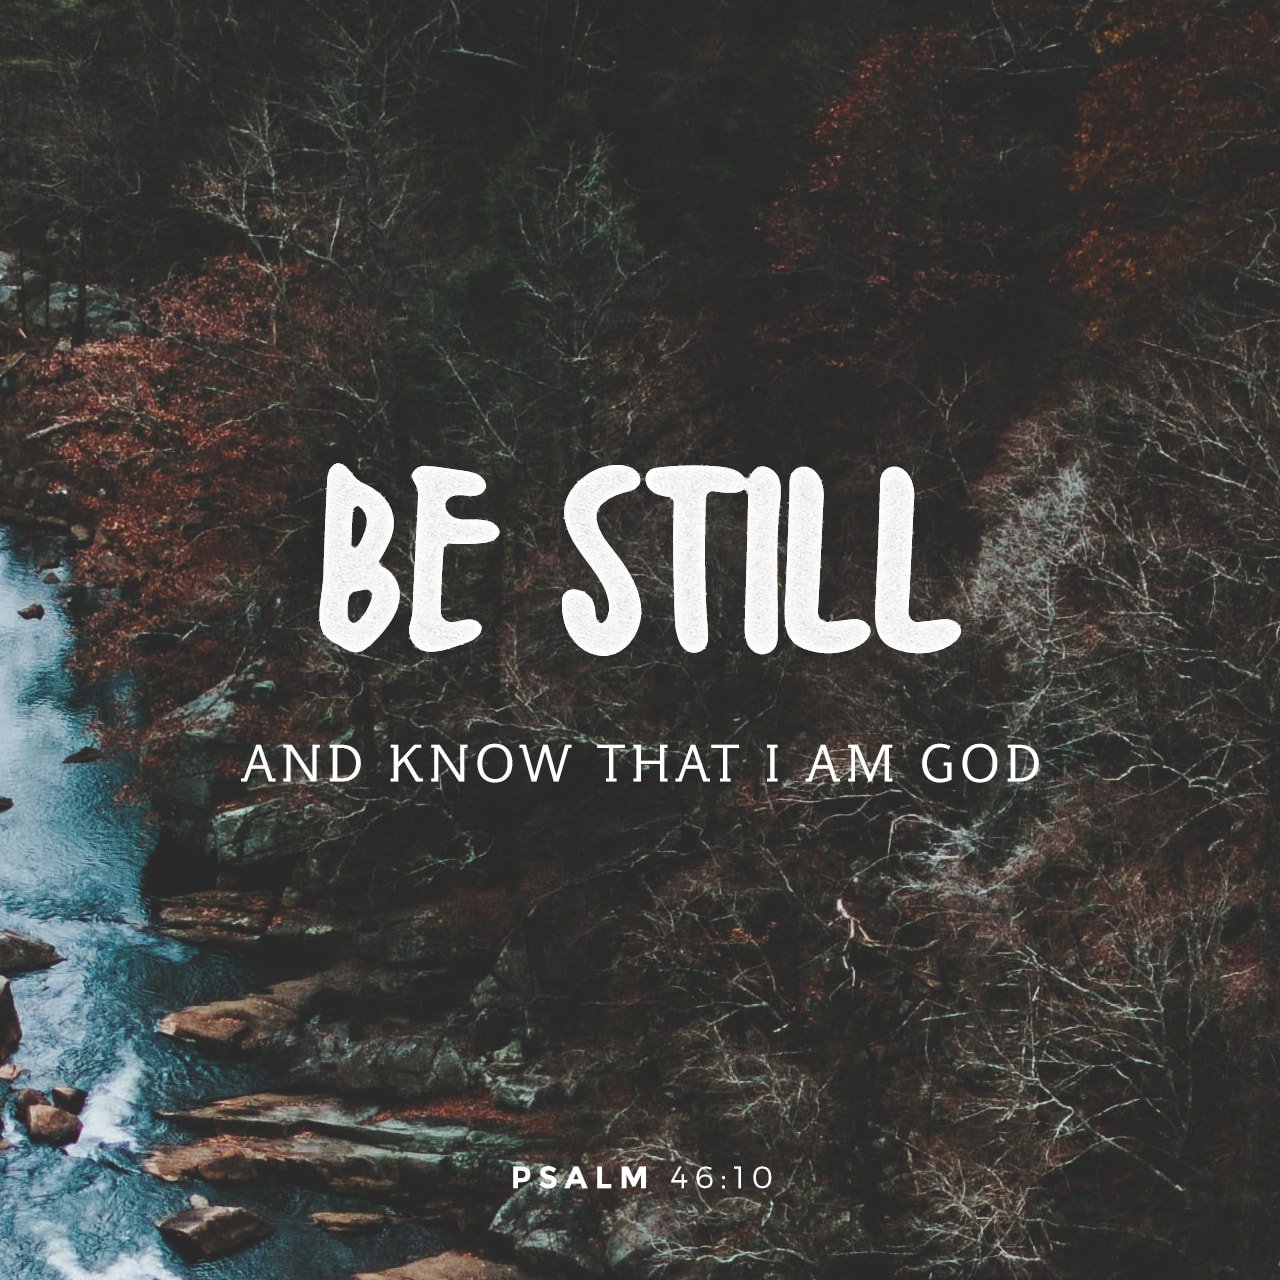 As you go about your work this week we encourage you to take time to be still and remember our holy, all-powerful God. He is present with you in every moment!